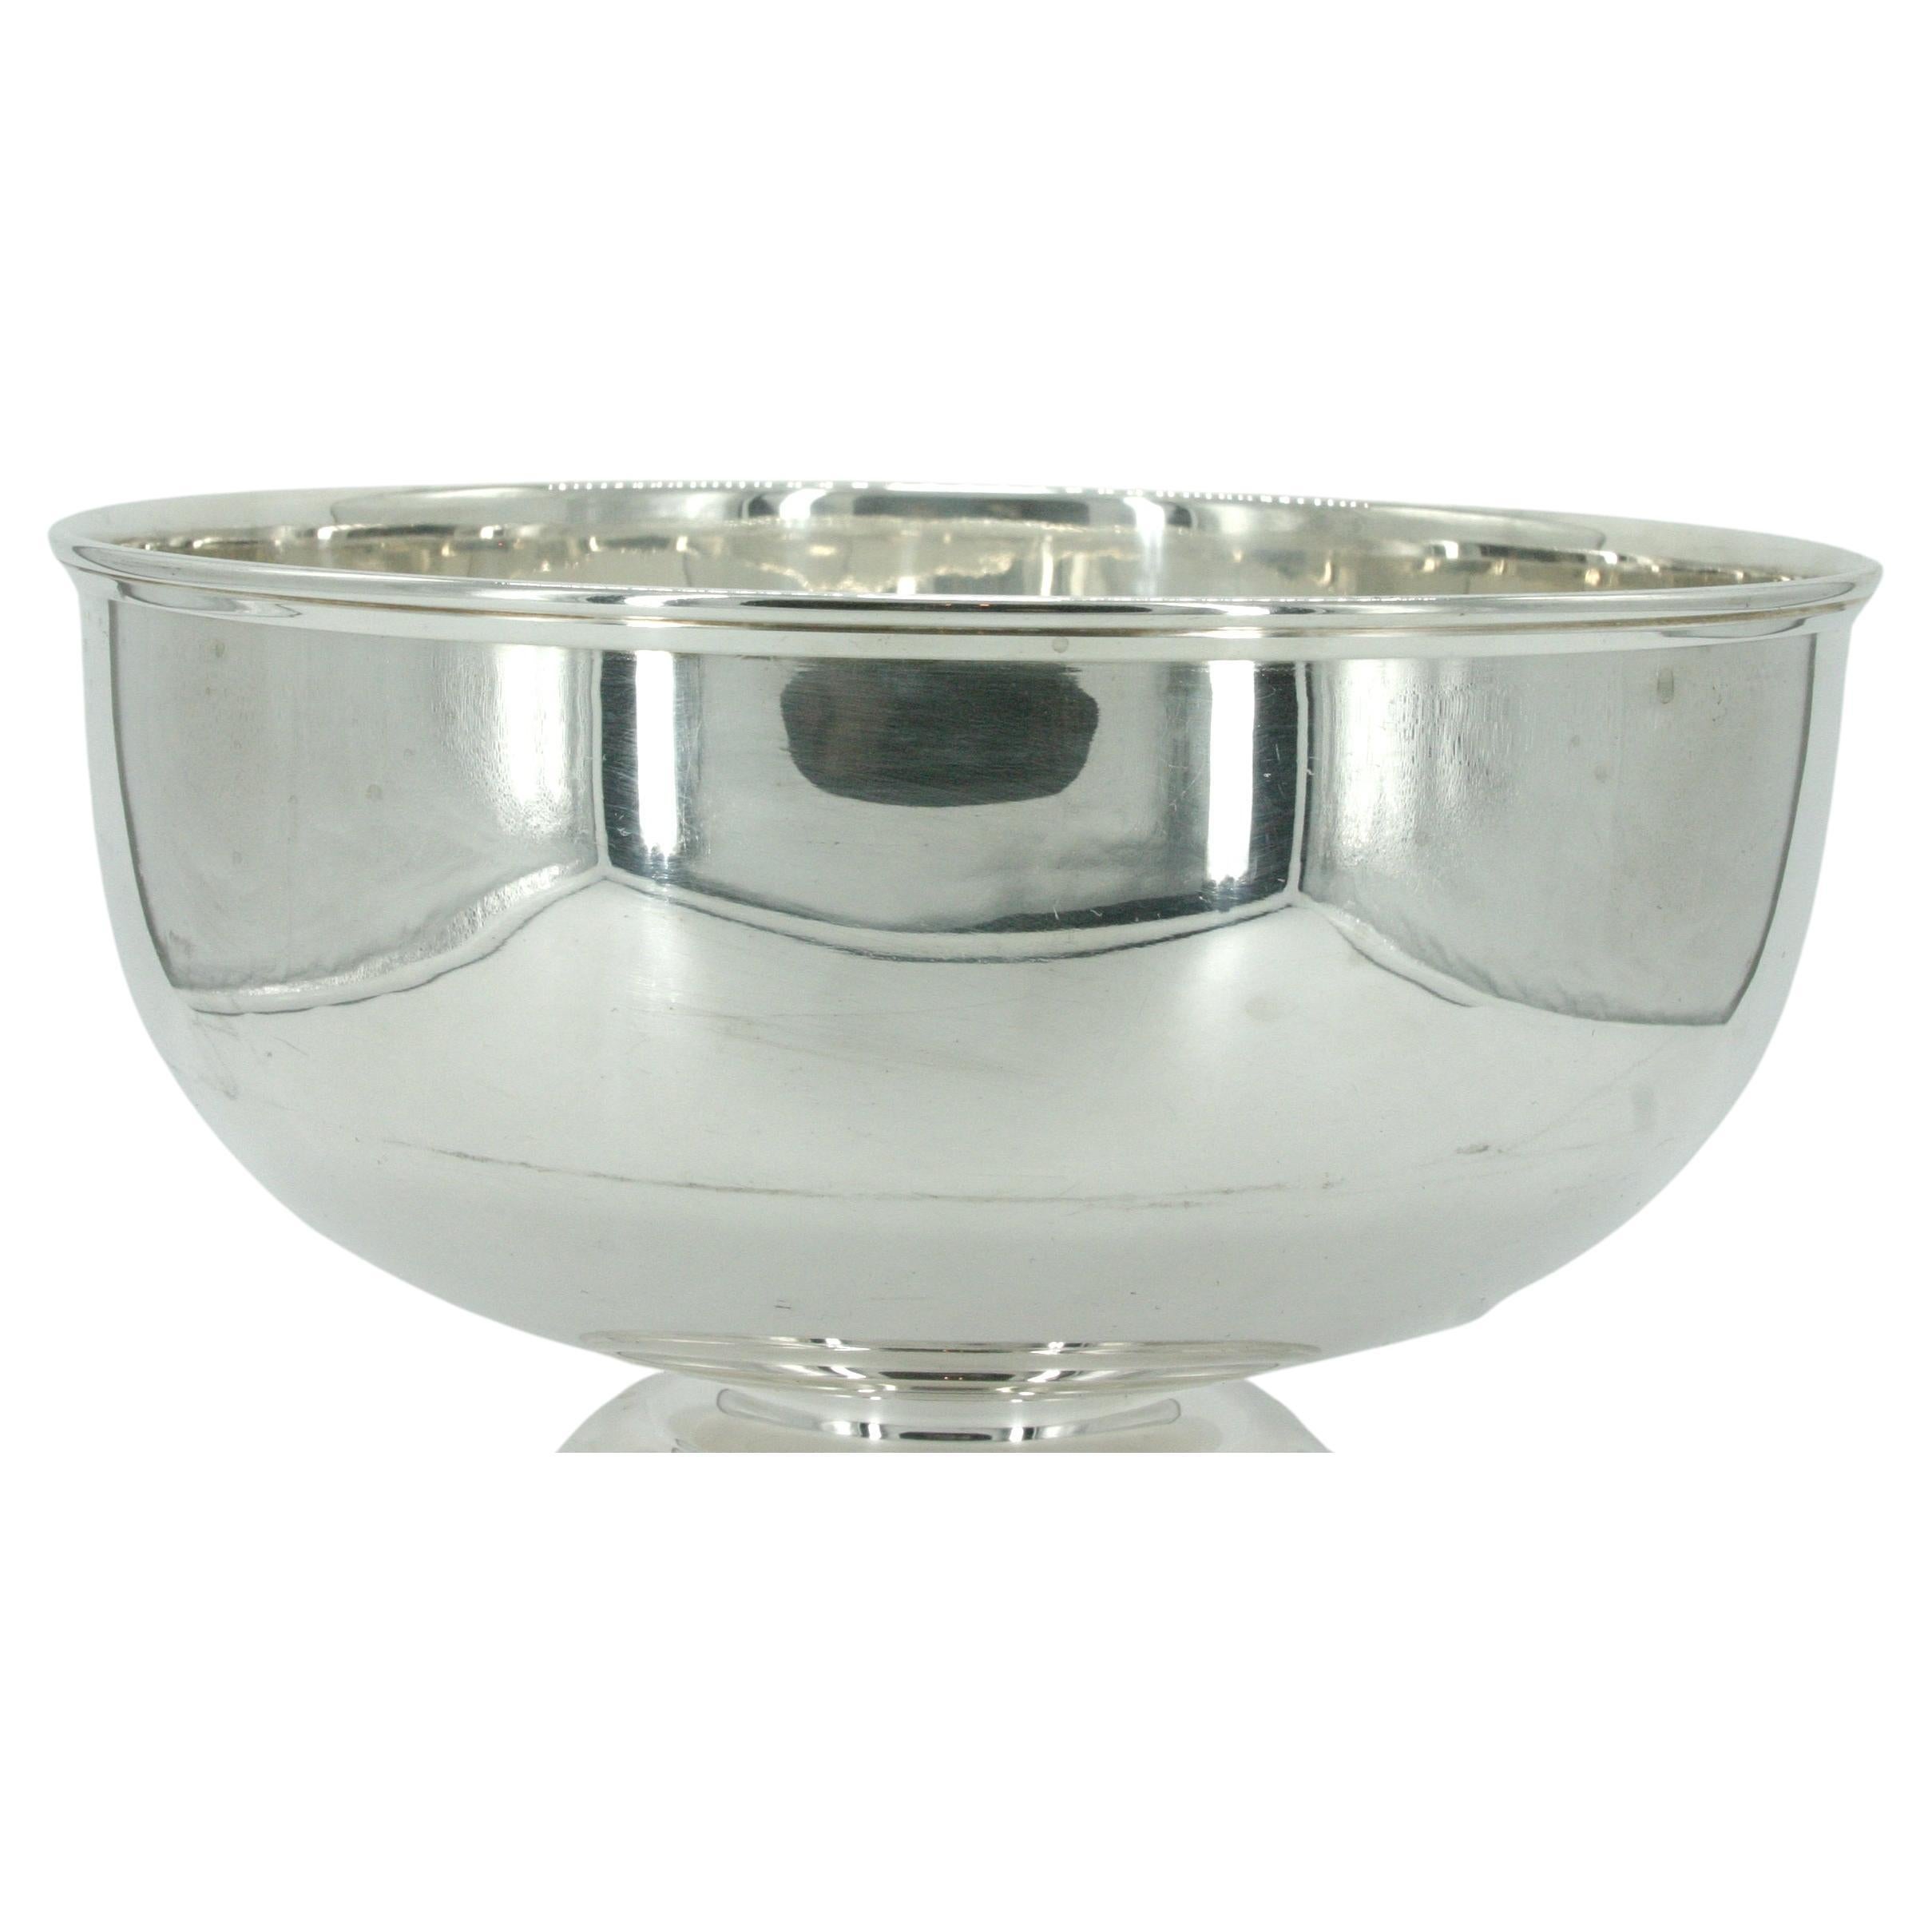 Mid-20th Century English Sheffield Punch Bowl / Wine Cooler For Sale